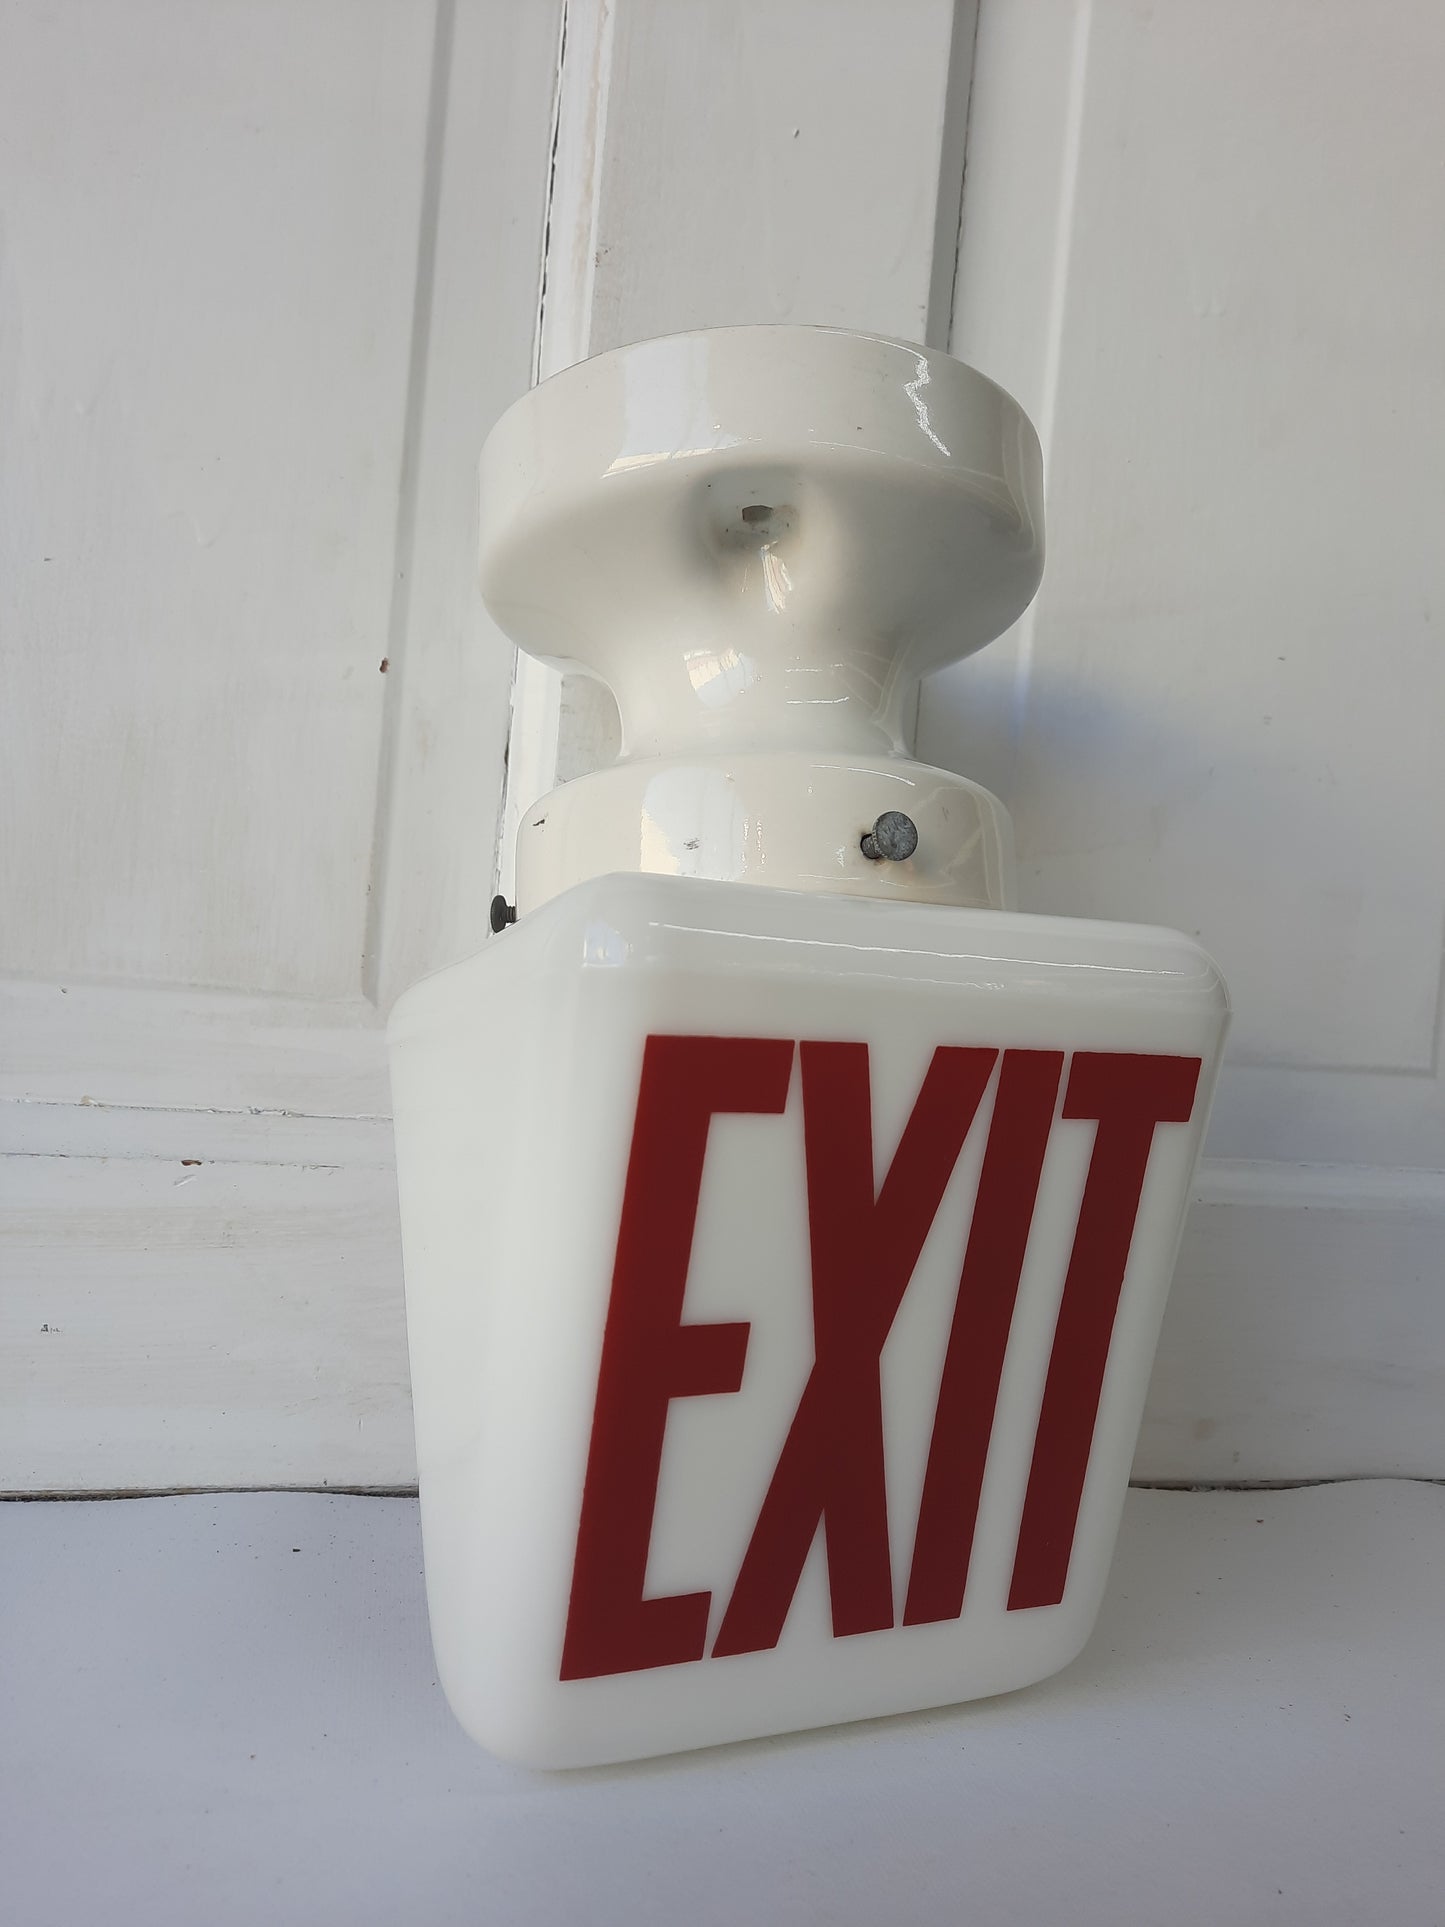 Vintage White and Red Exit Sign, Ceiling Mounted Exit Sign Light 011101